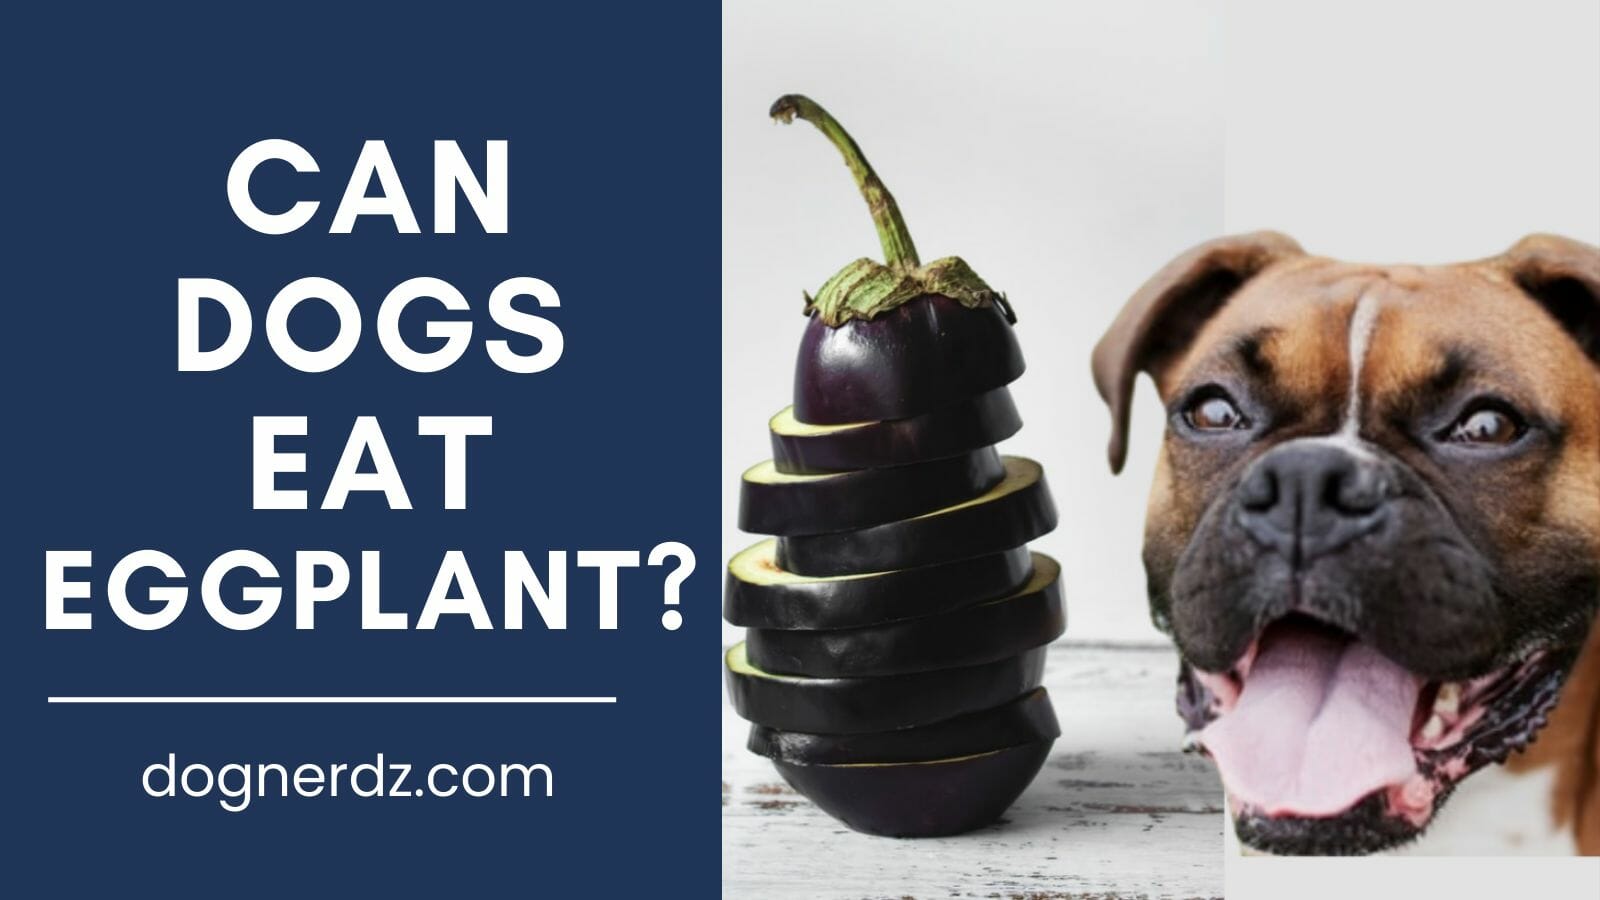 can dogs eat eggplant?